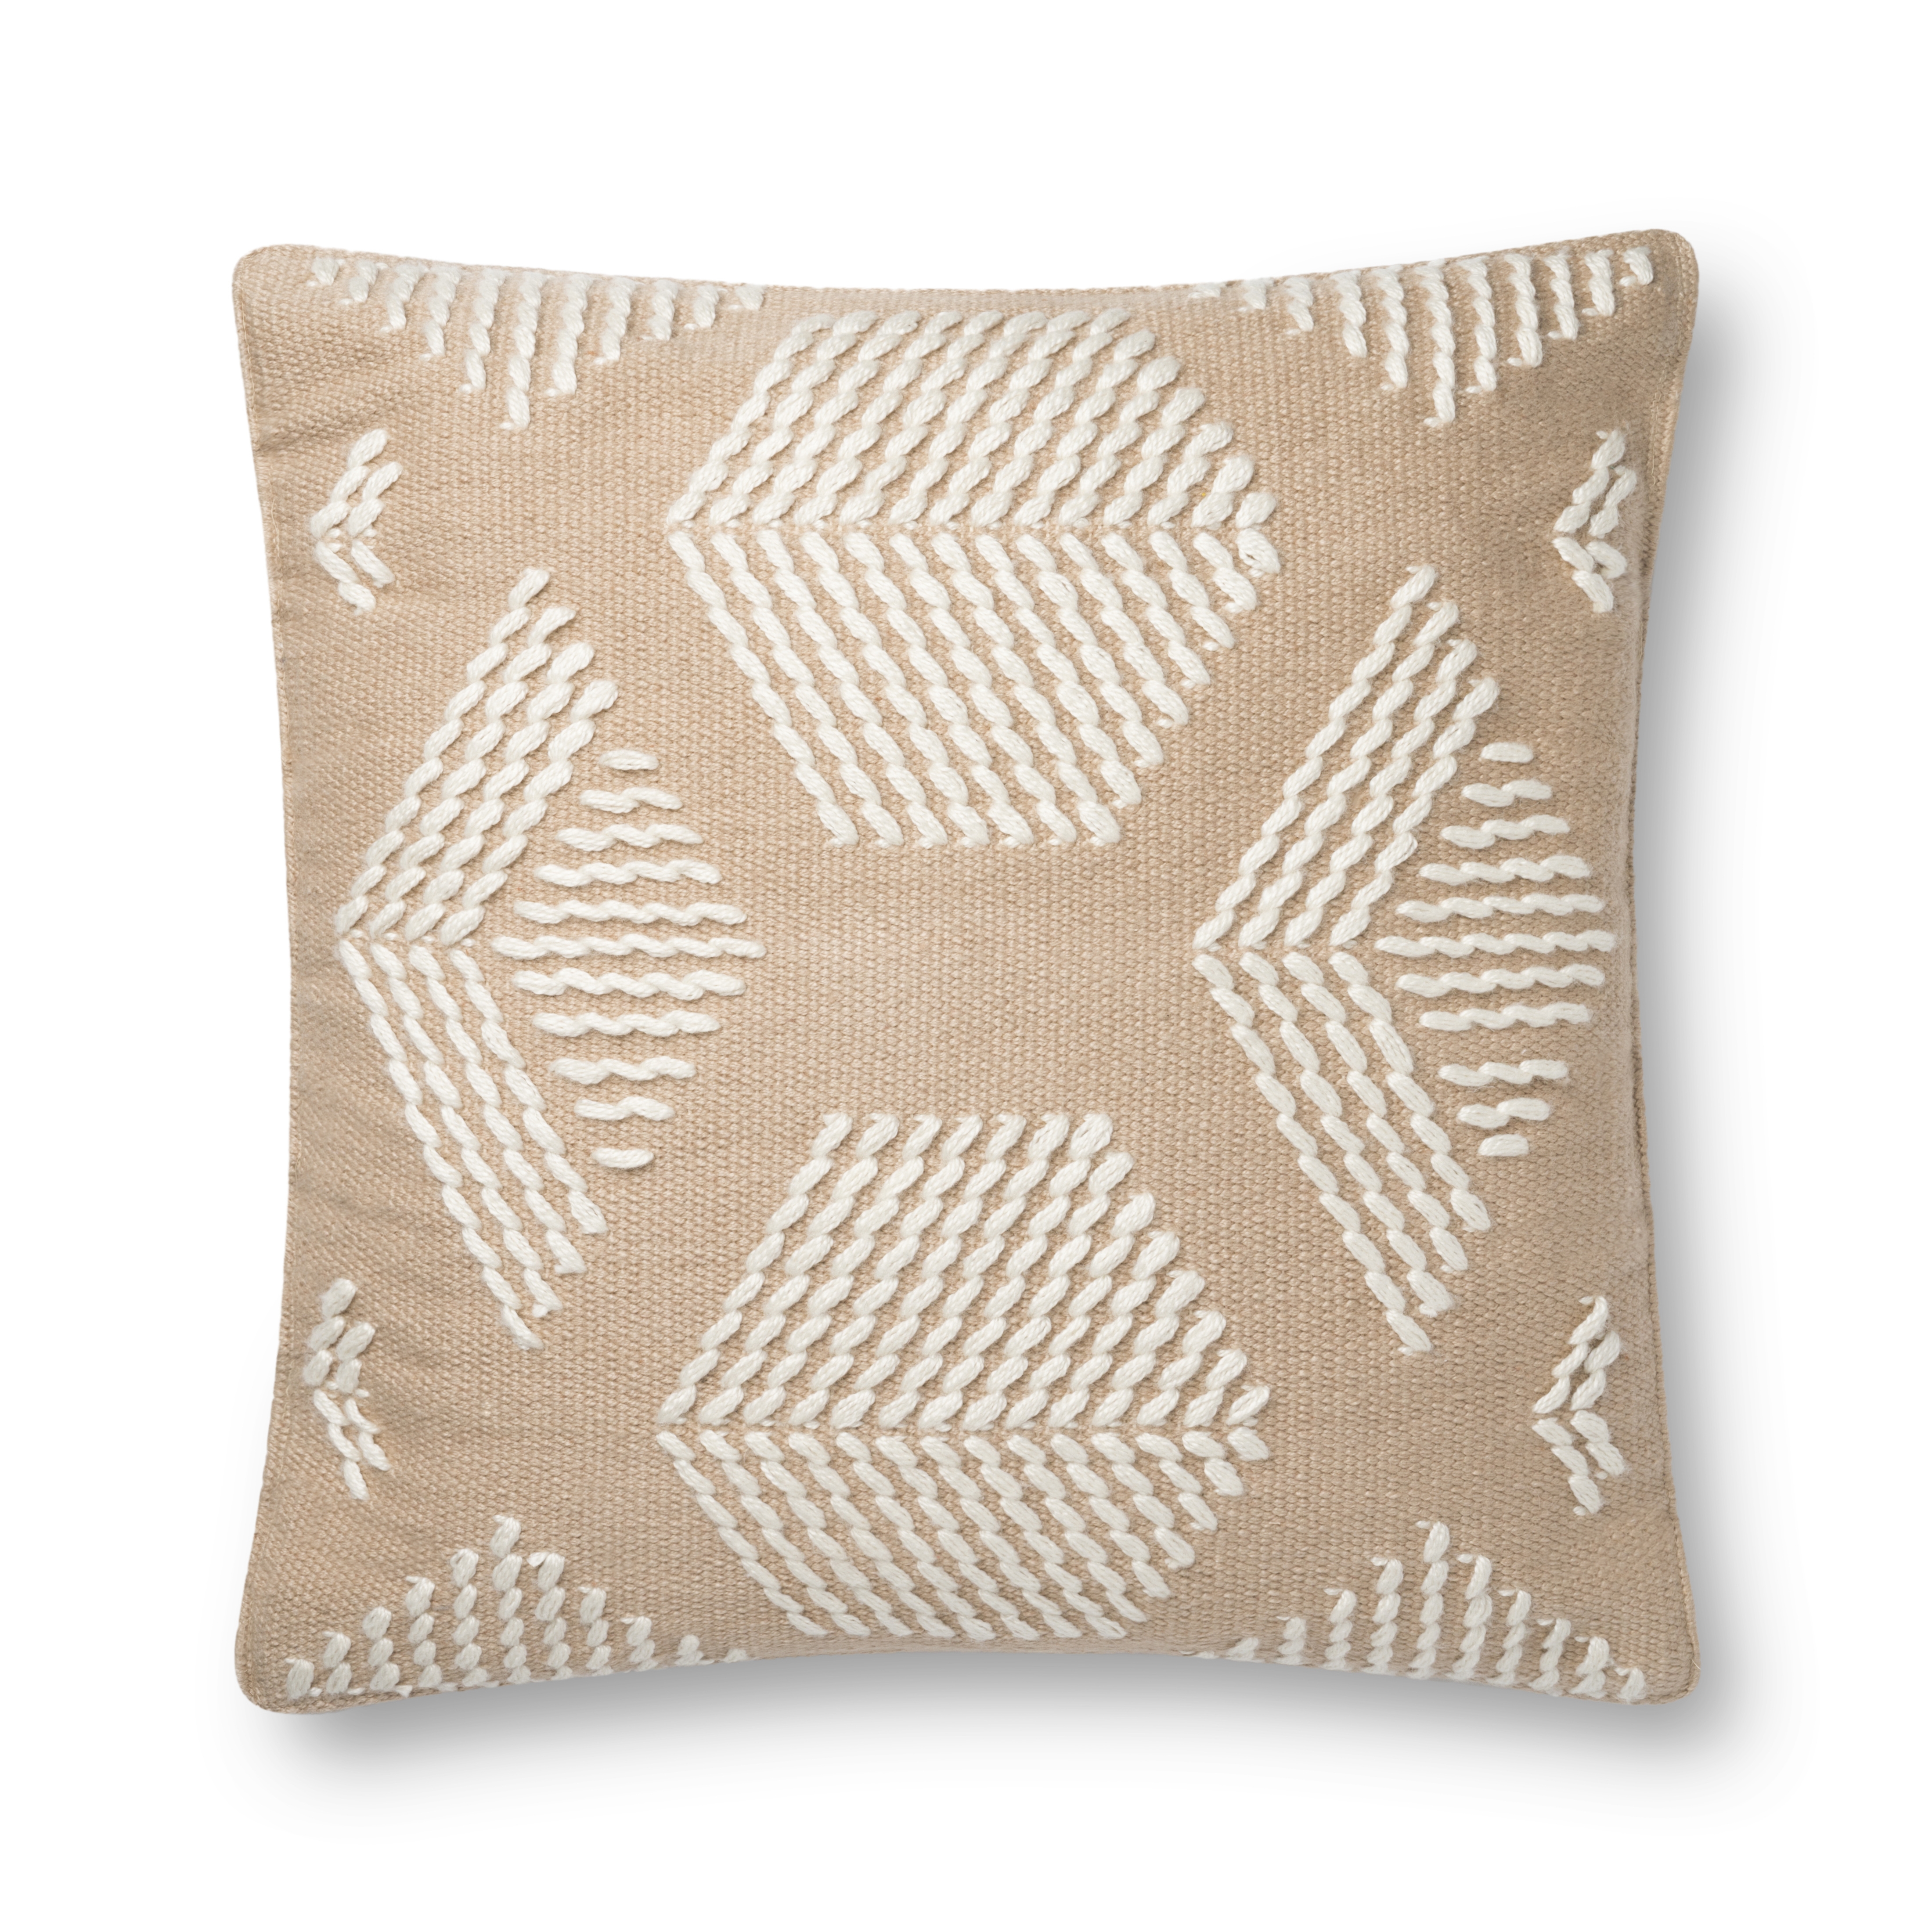 Magnolia Home by Joanna Gaines PILLOWS P1120 SAND / IVORY 22" x 22" Cover w/Down - Image 0